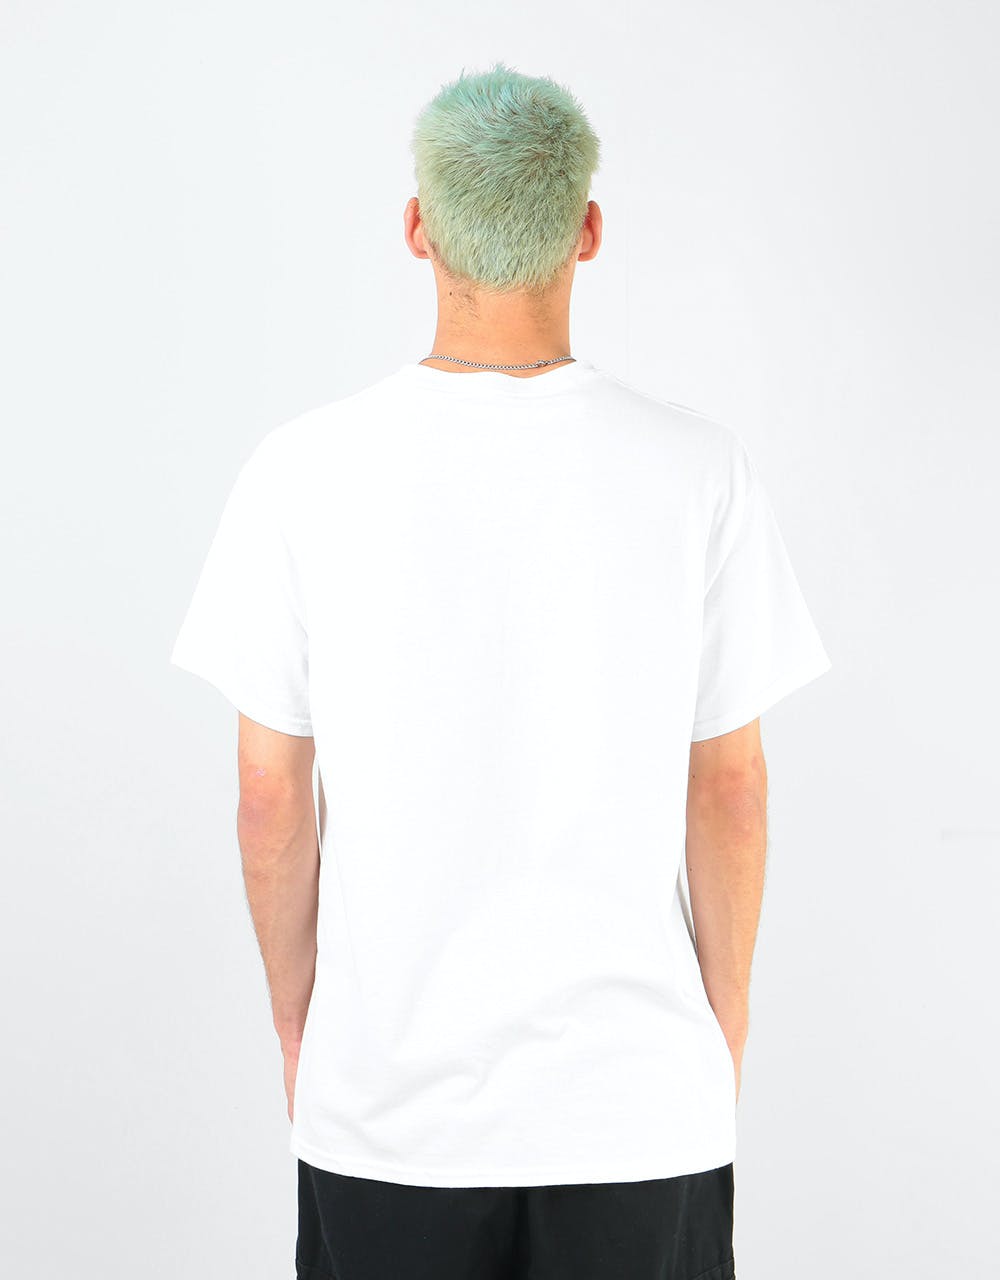 Route One Countenance T-Shirt - White